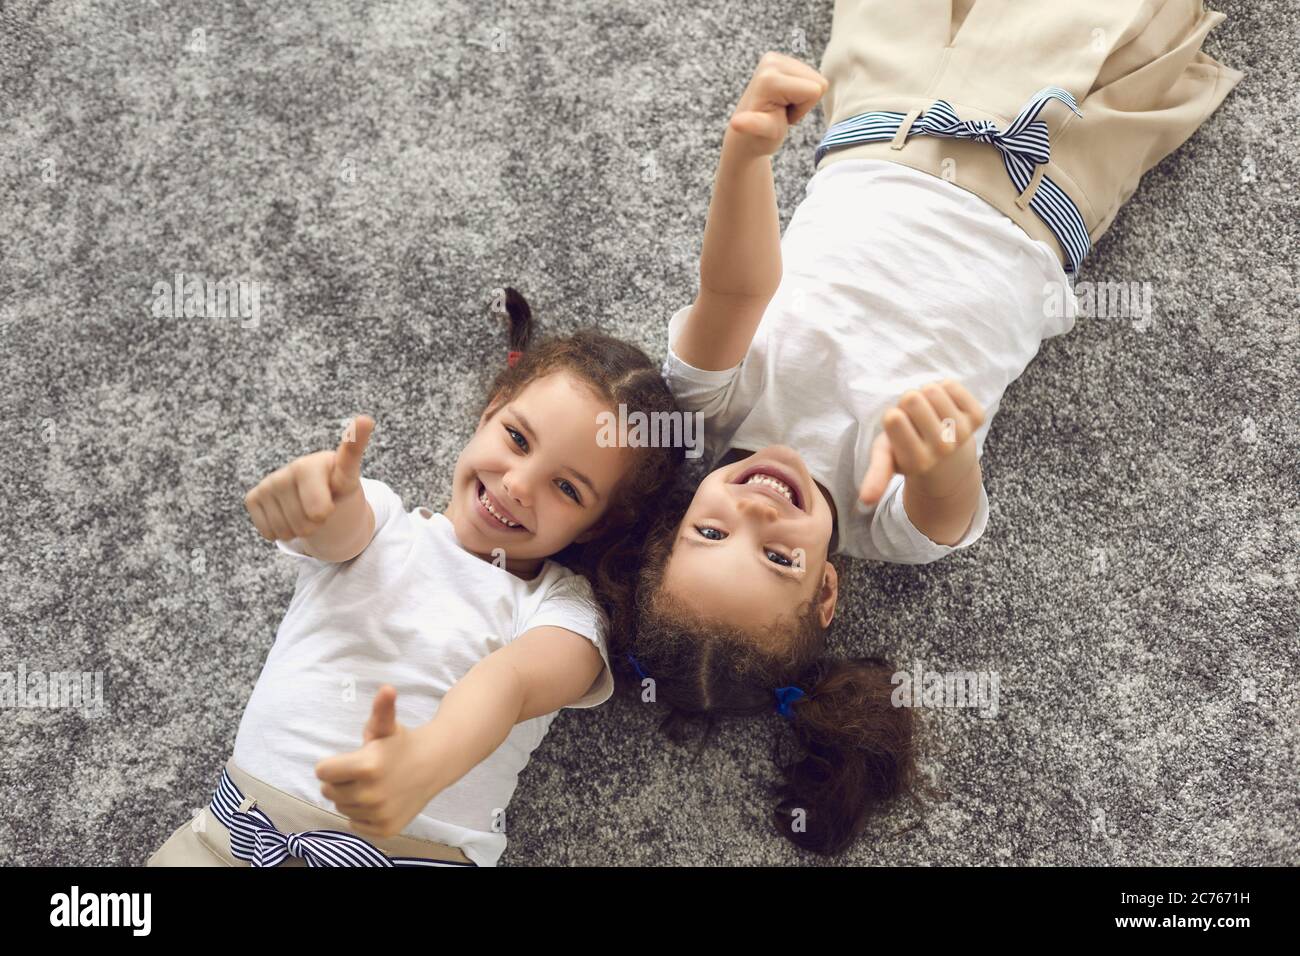 Twin sisters child showing thumbs up gesture while lying on soft carpet, top view. Joyful siblings spending time together Stock Photo